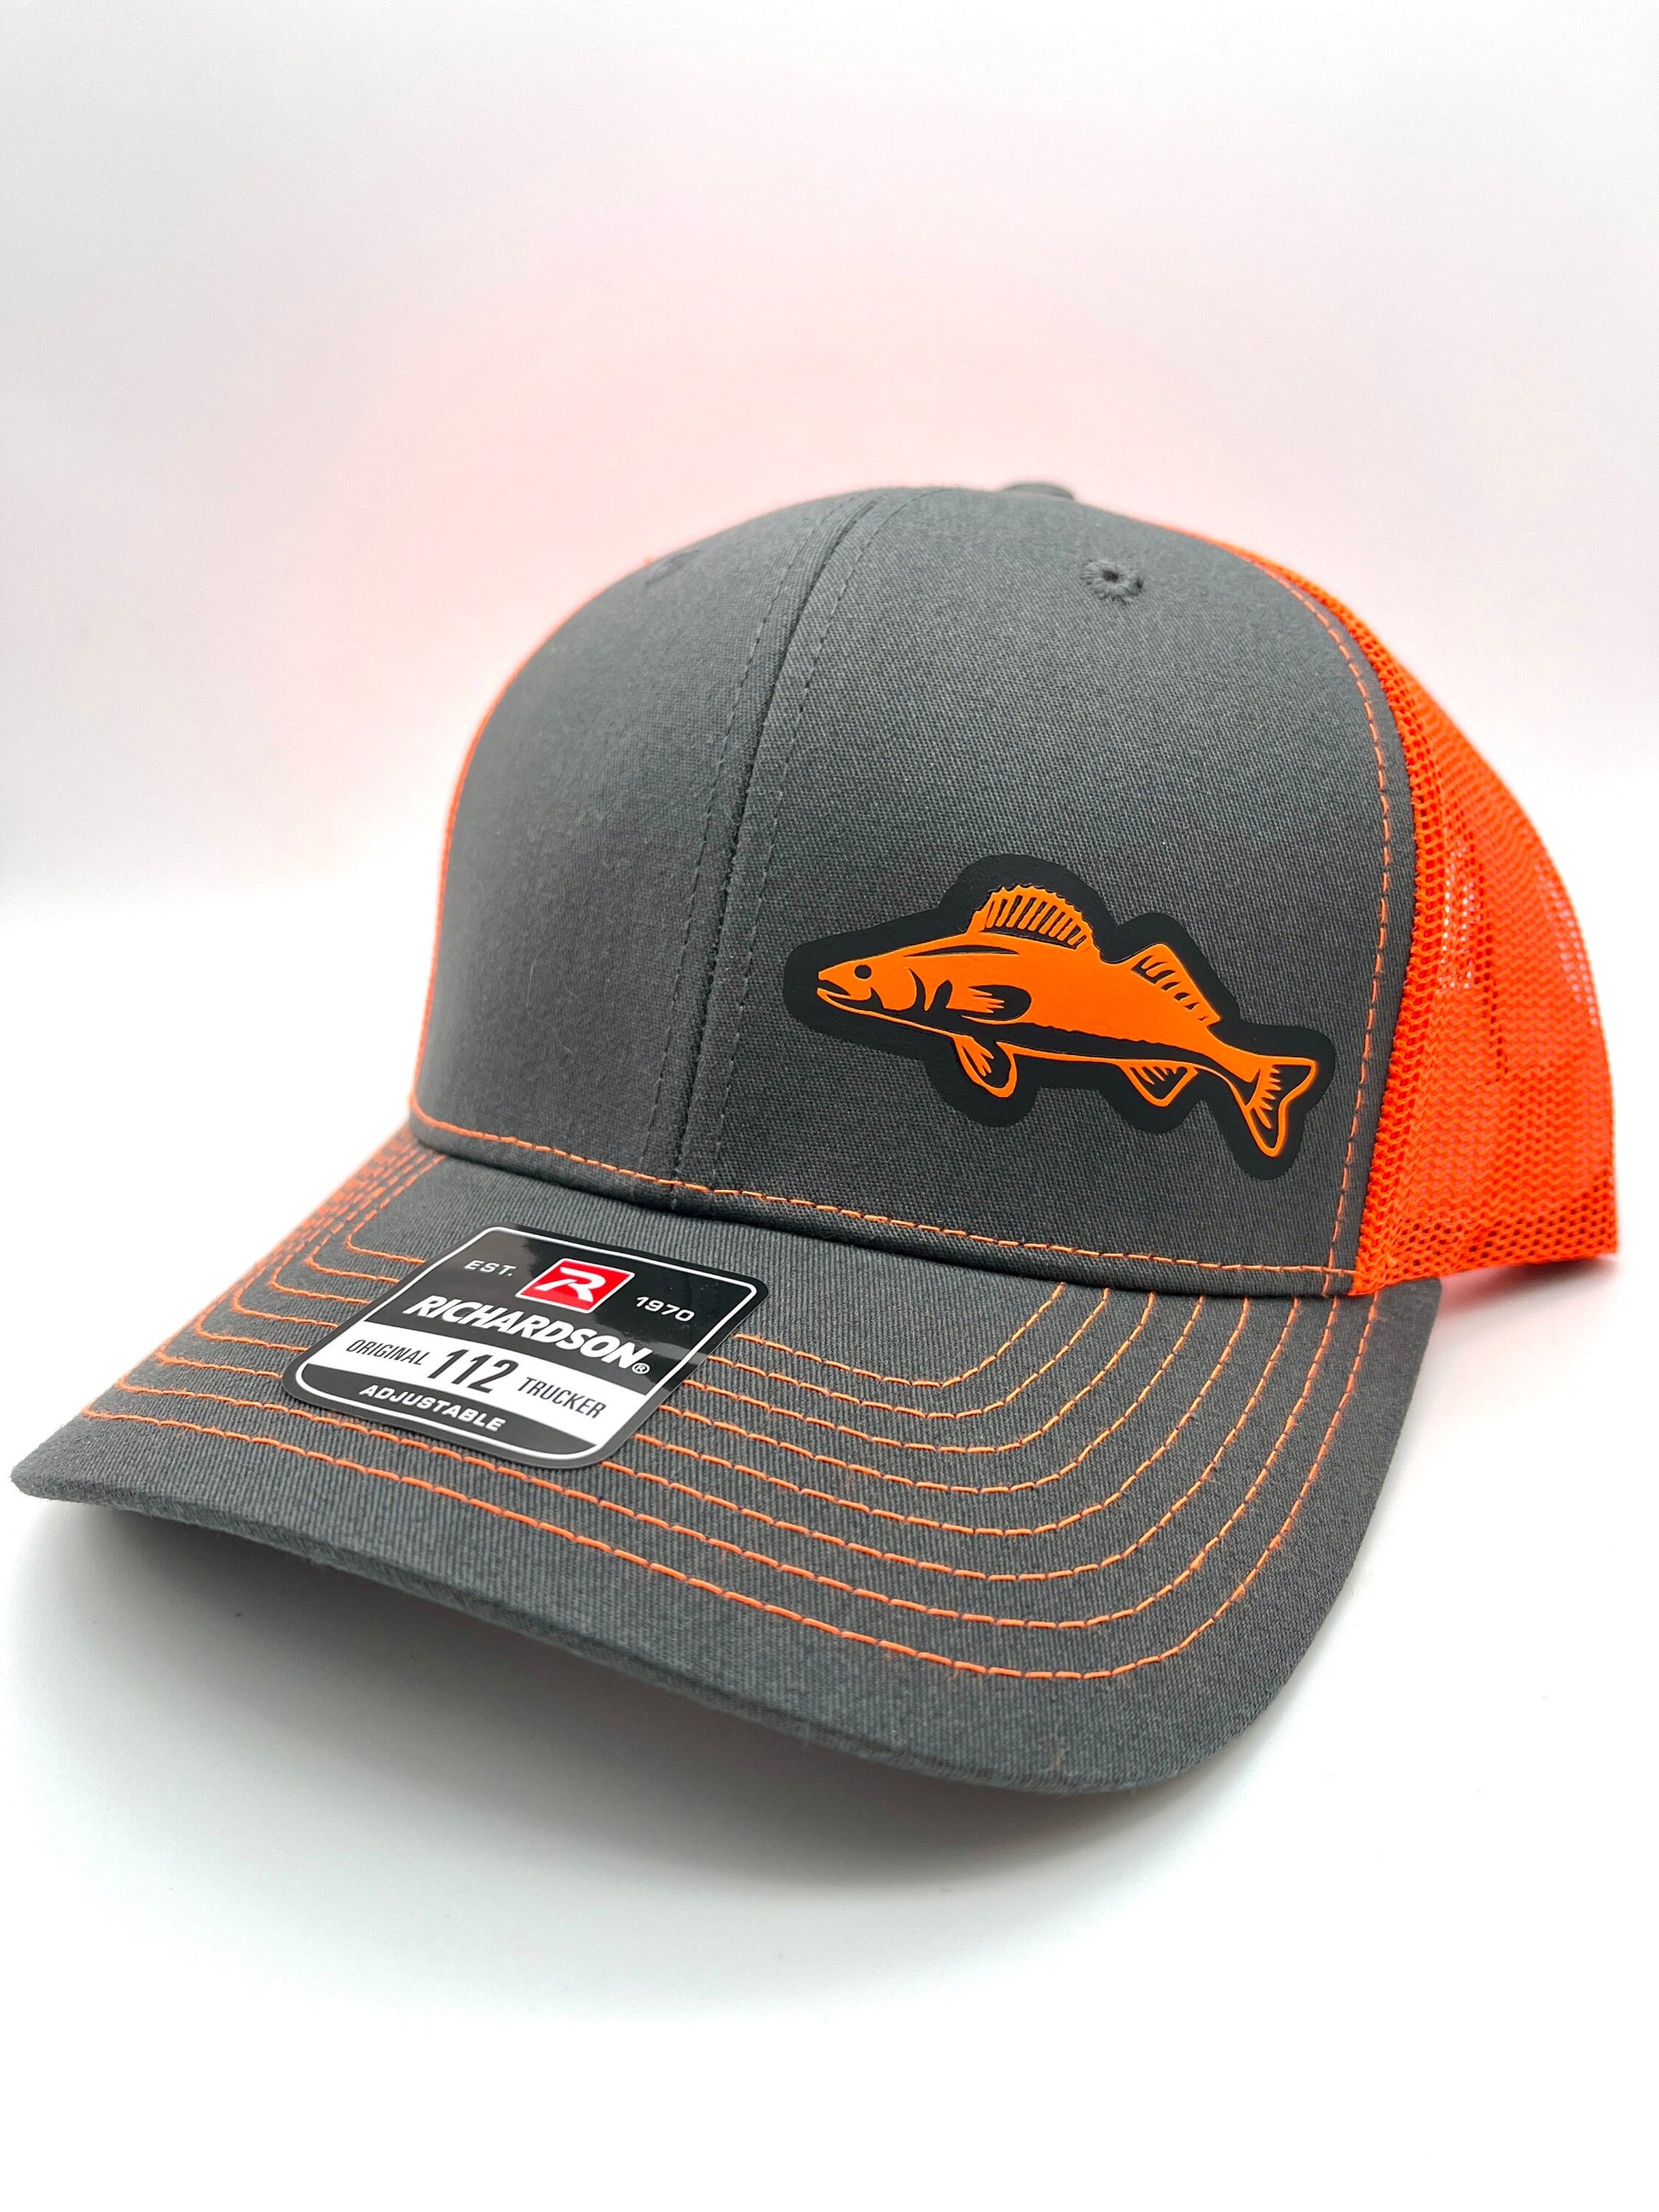 Walleye Fishing Snap Back Adjustable Hat with Multiple Hat Options